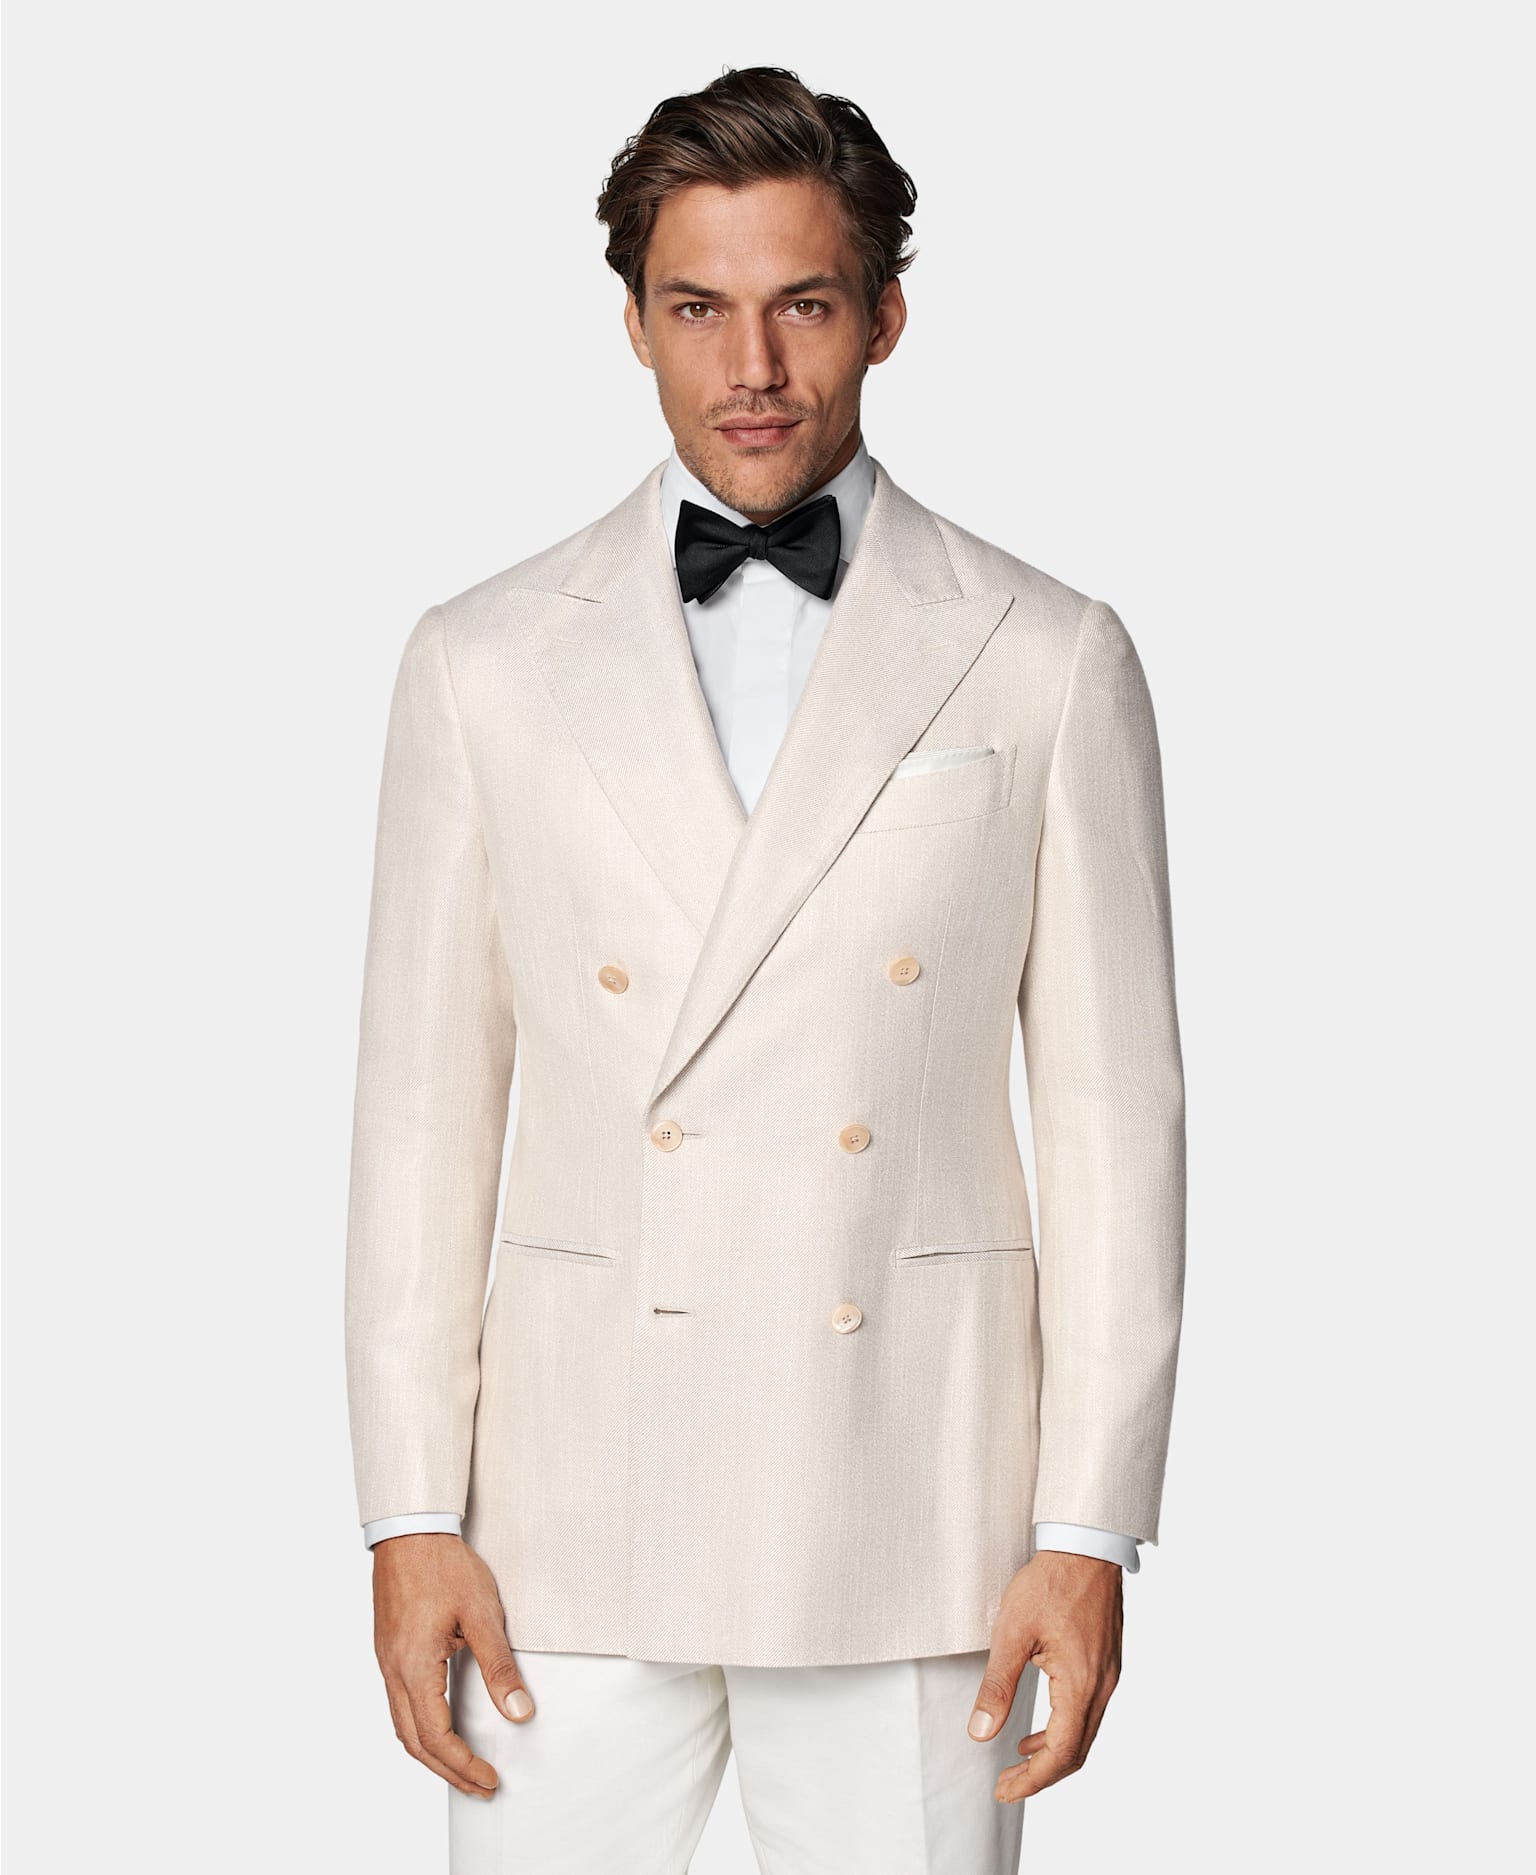 Off-white double-breasted tuxedo with white shirt and black silk bow tie.